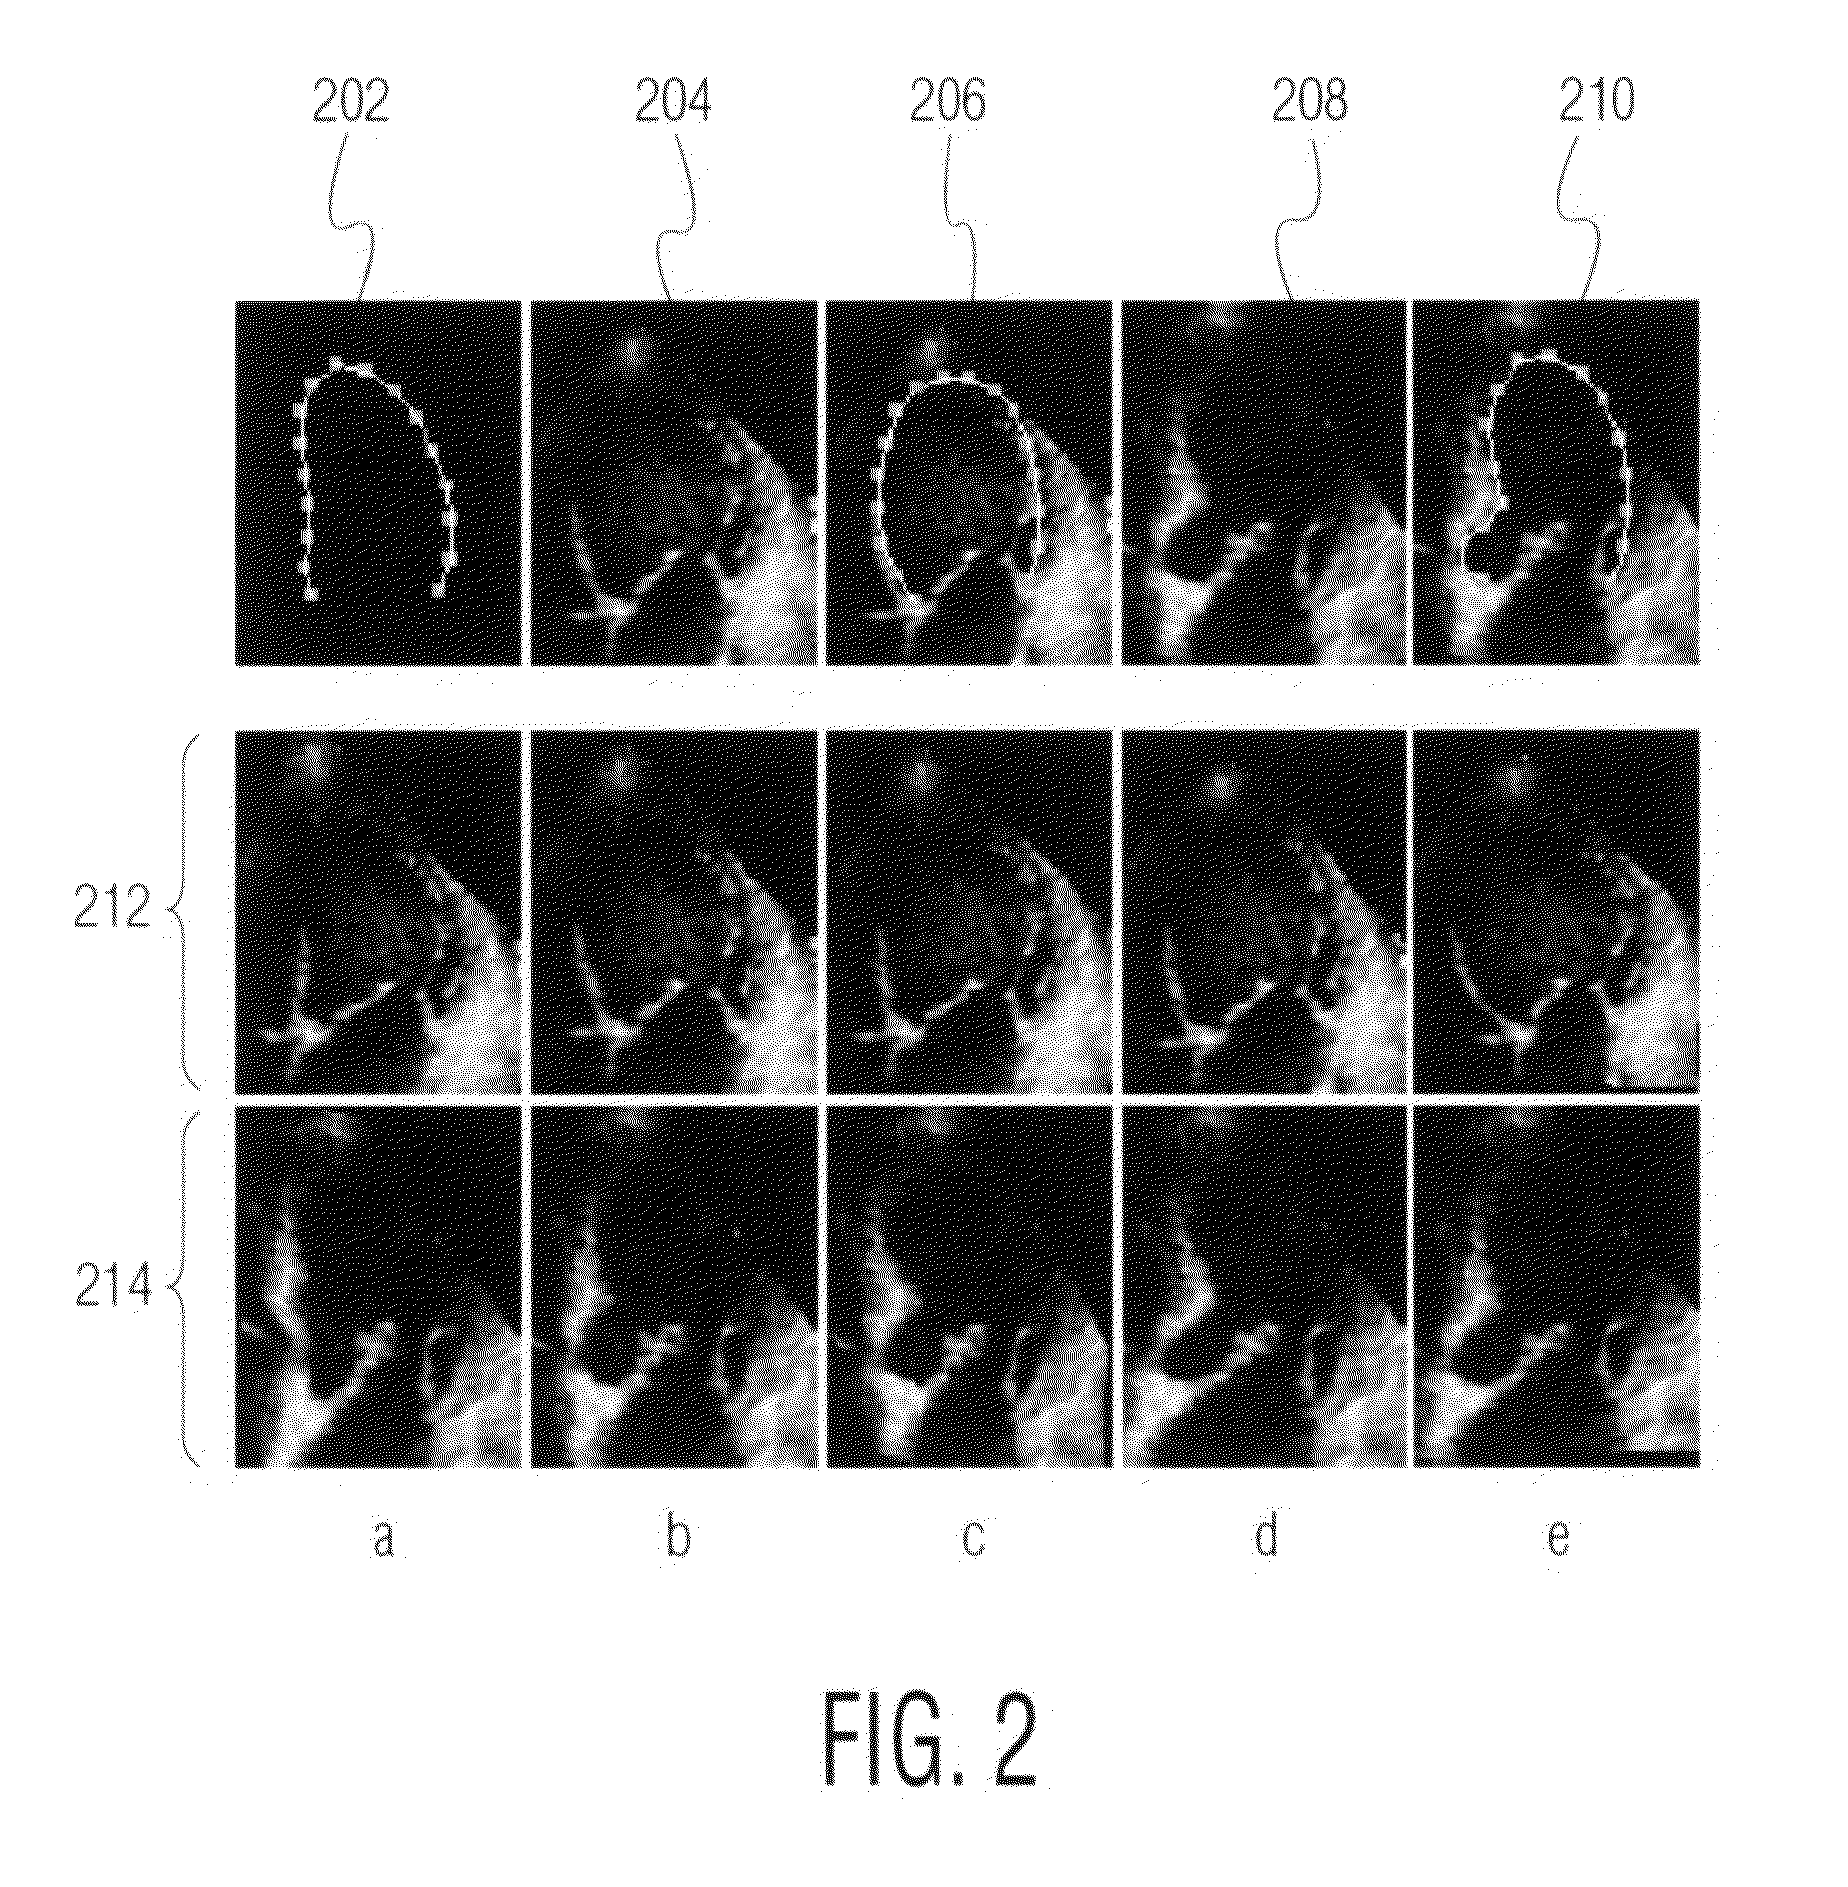 System and method for learning relative distance in a shape space using image based features